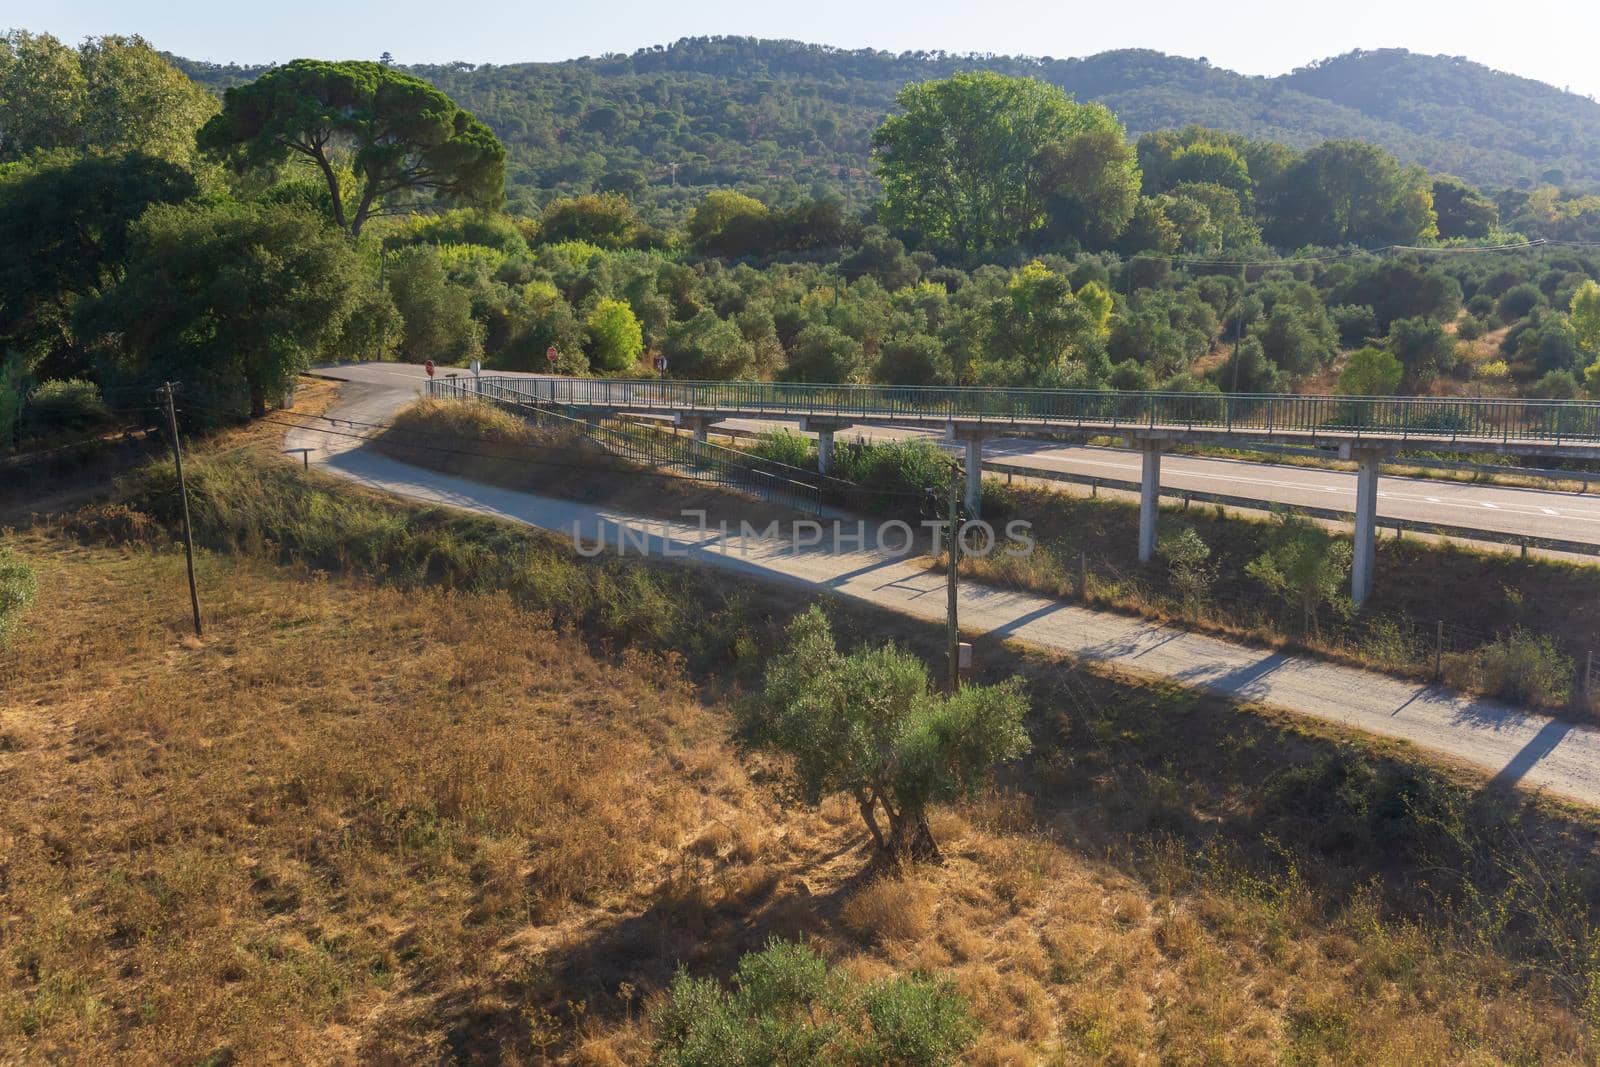 Pedestrian bridge over the road outside the city in Portugal